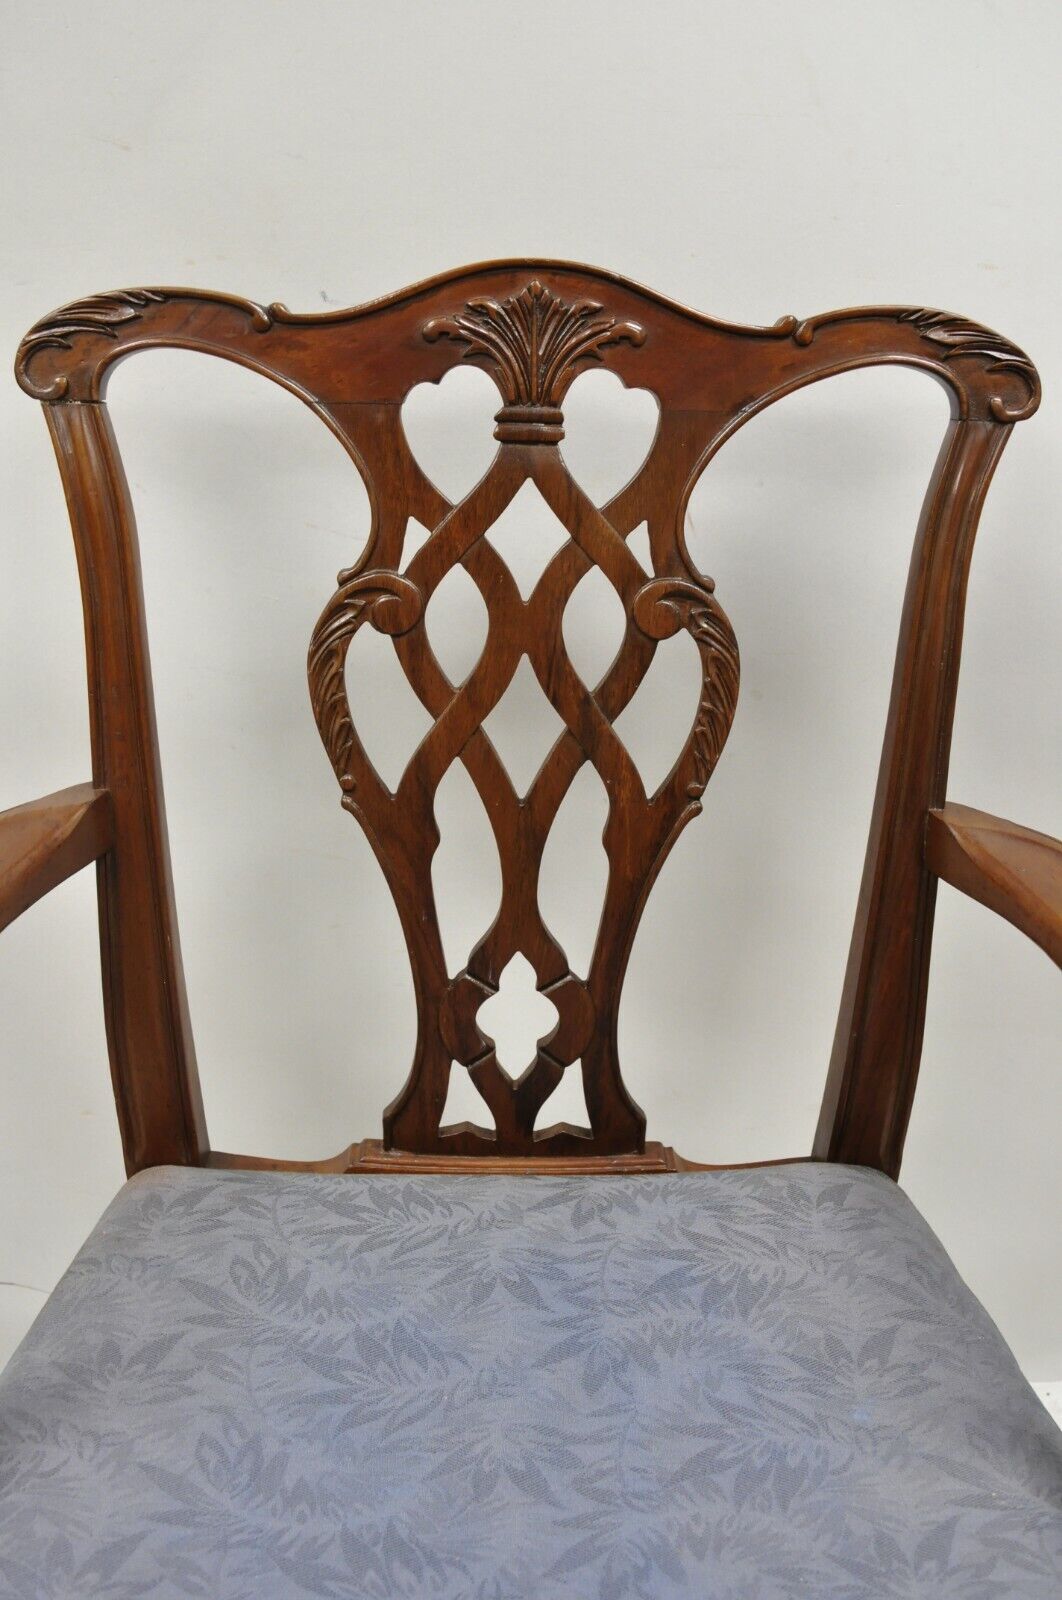 Vintage Georgian Chippendale Carved Mahogany Dining Captains Arm Chairs - Pair B